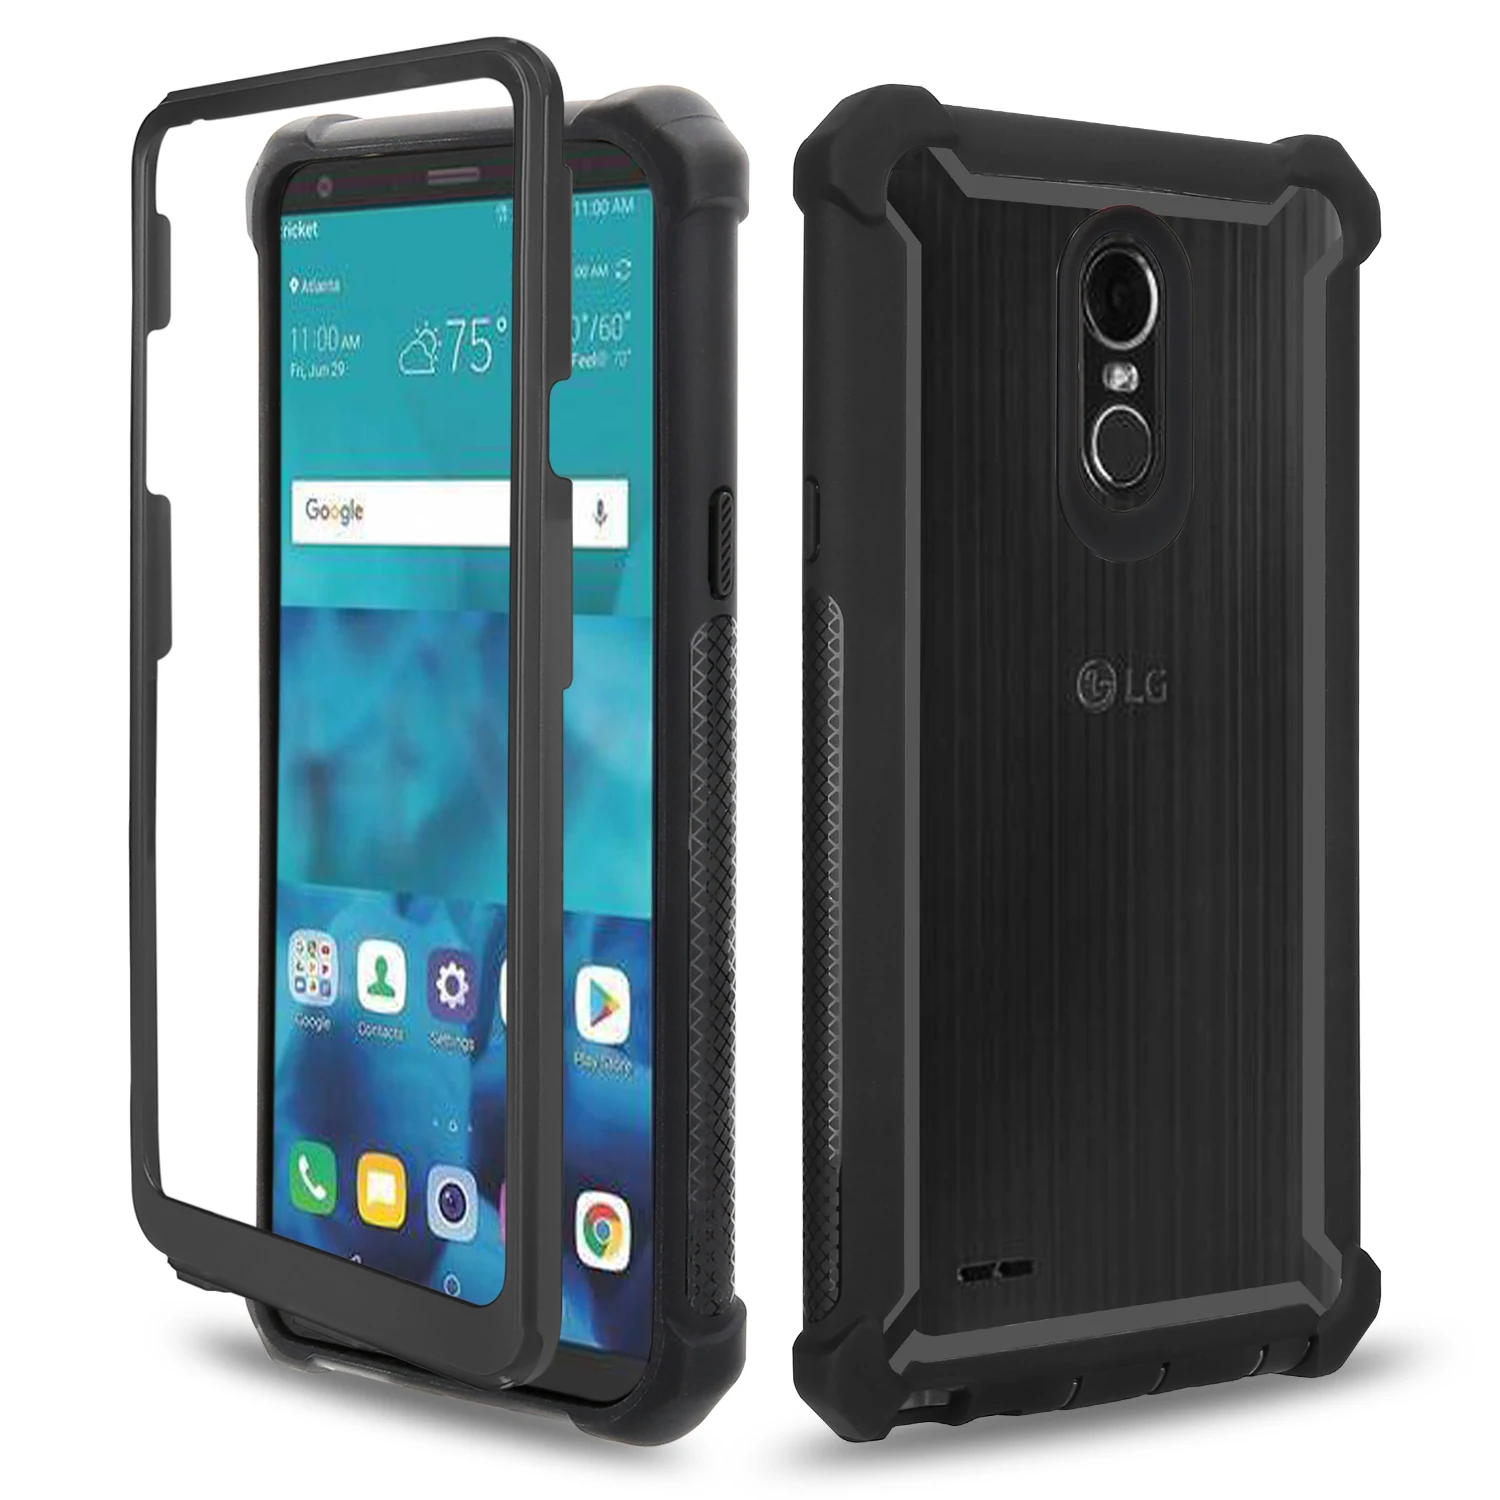 Full Body Protective DropProof Case for LG Stylo 5 4 Plus Aristo 2 3 G8 Thinq X210 LV3 K4 Shock Absorption Bumper Clear PC Cover | Мобильные